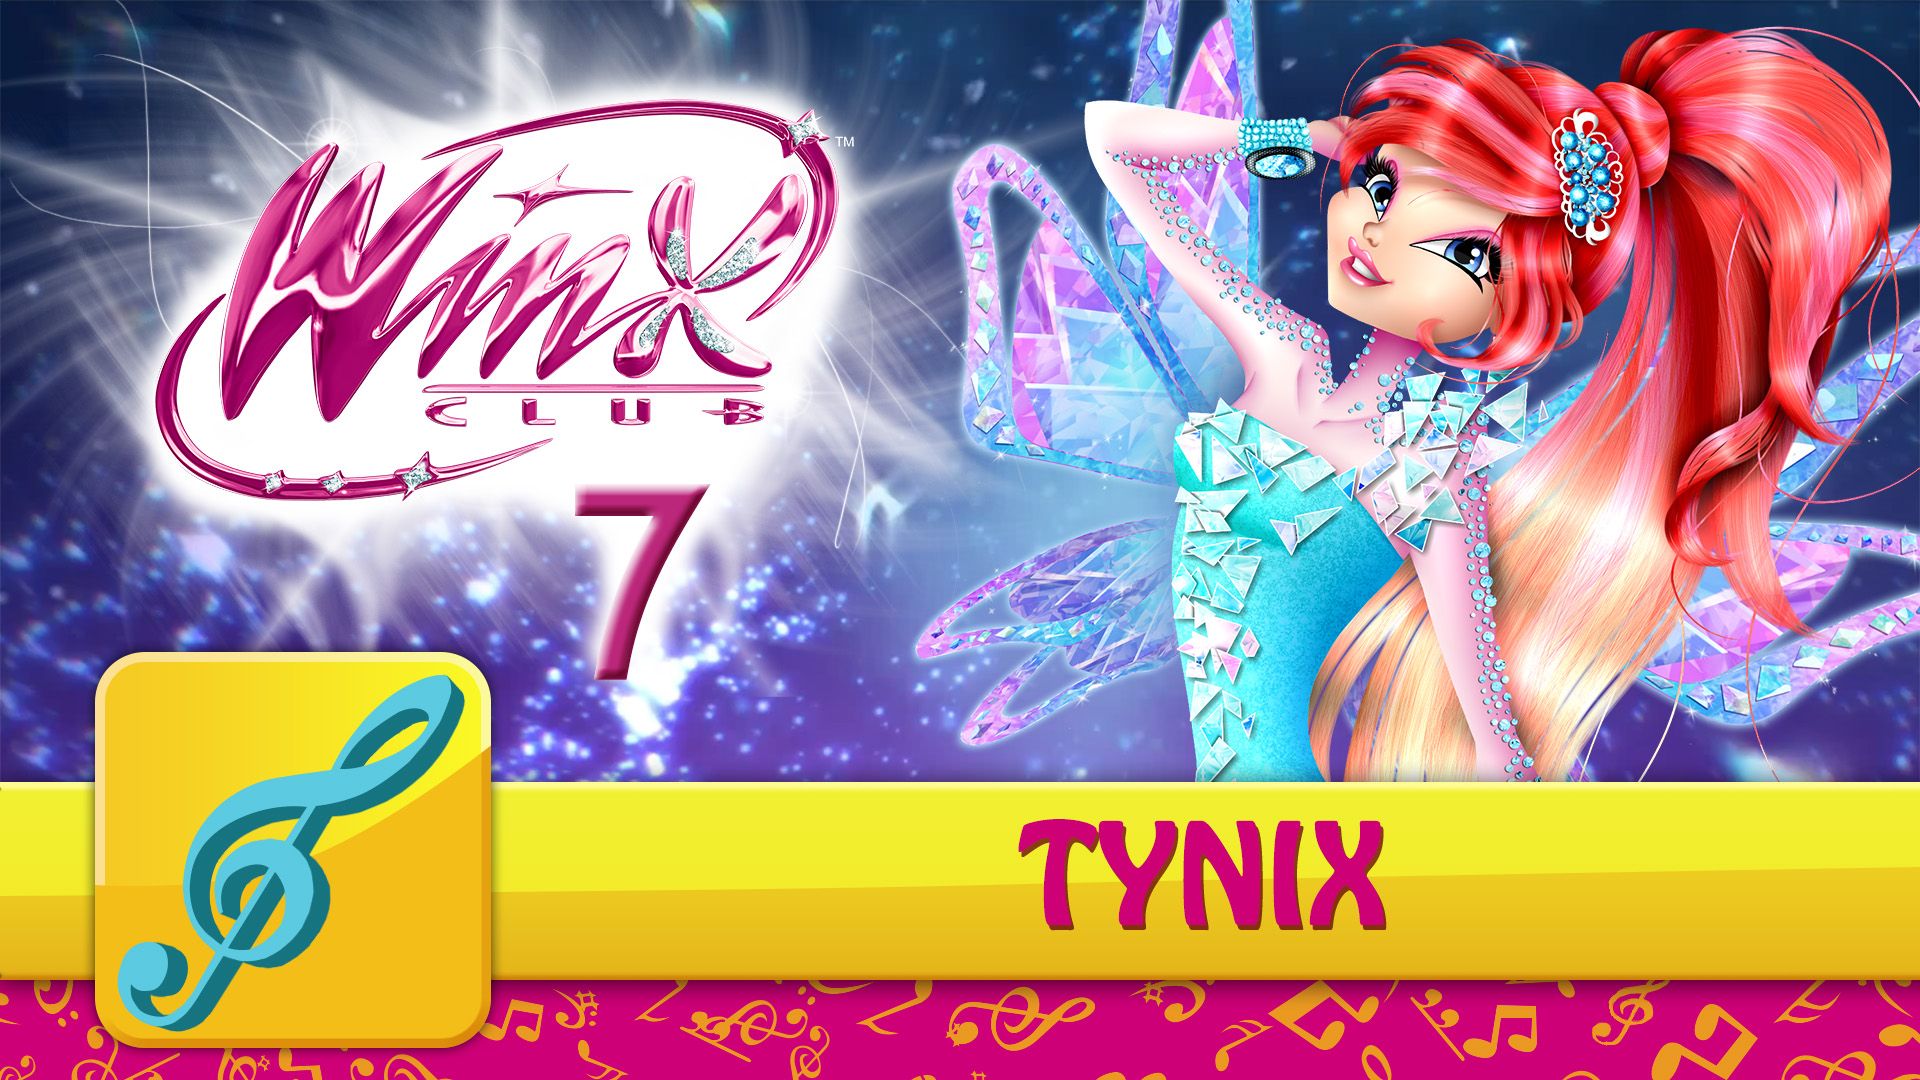 Background And Resources On TYNIX WINX